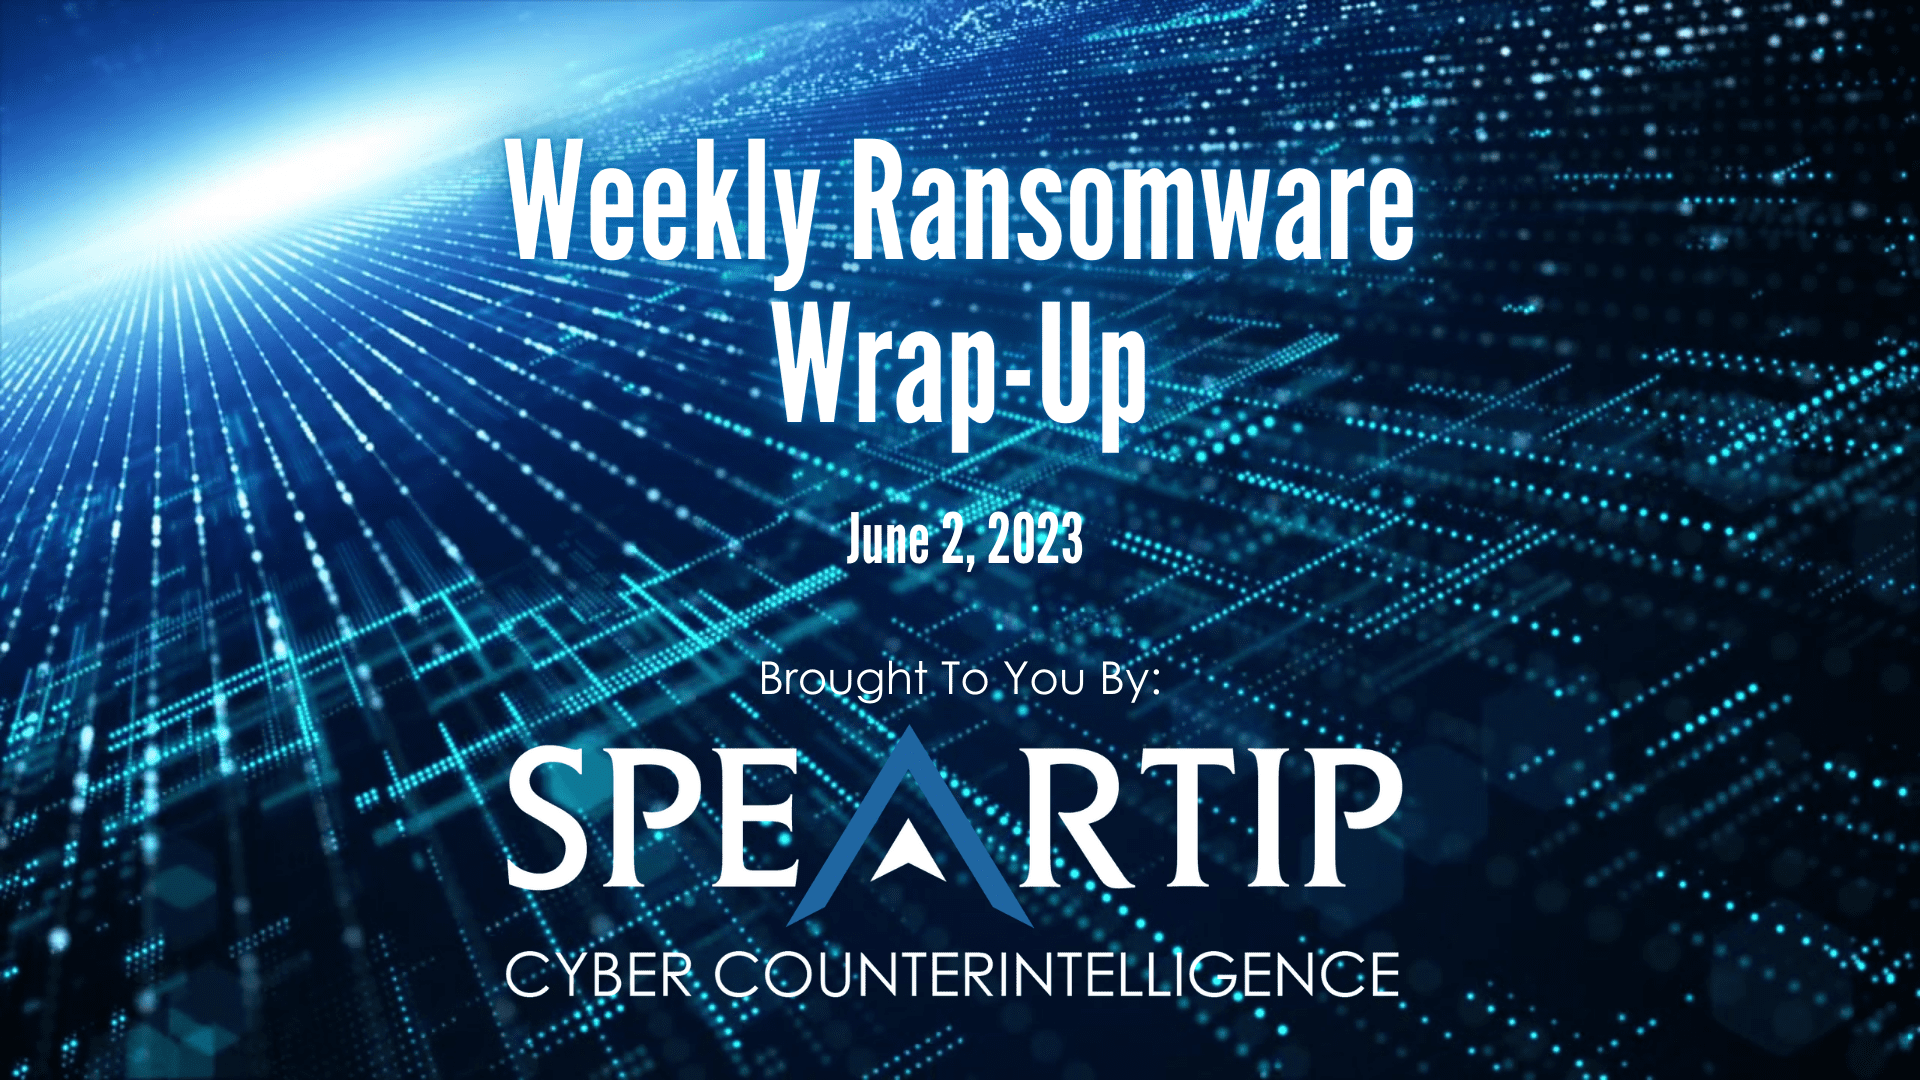 June-2-2023-Weekly Ransomware Wrap-up